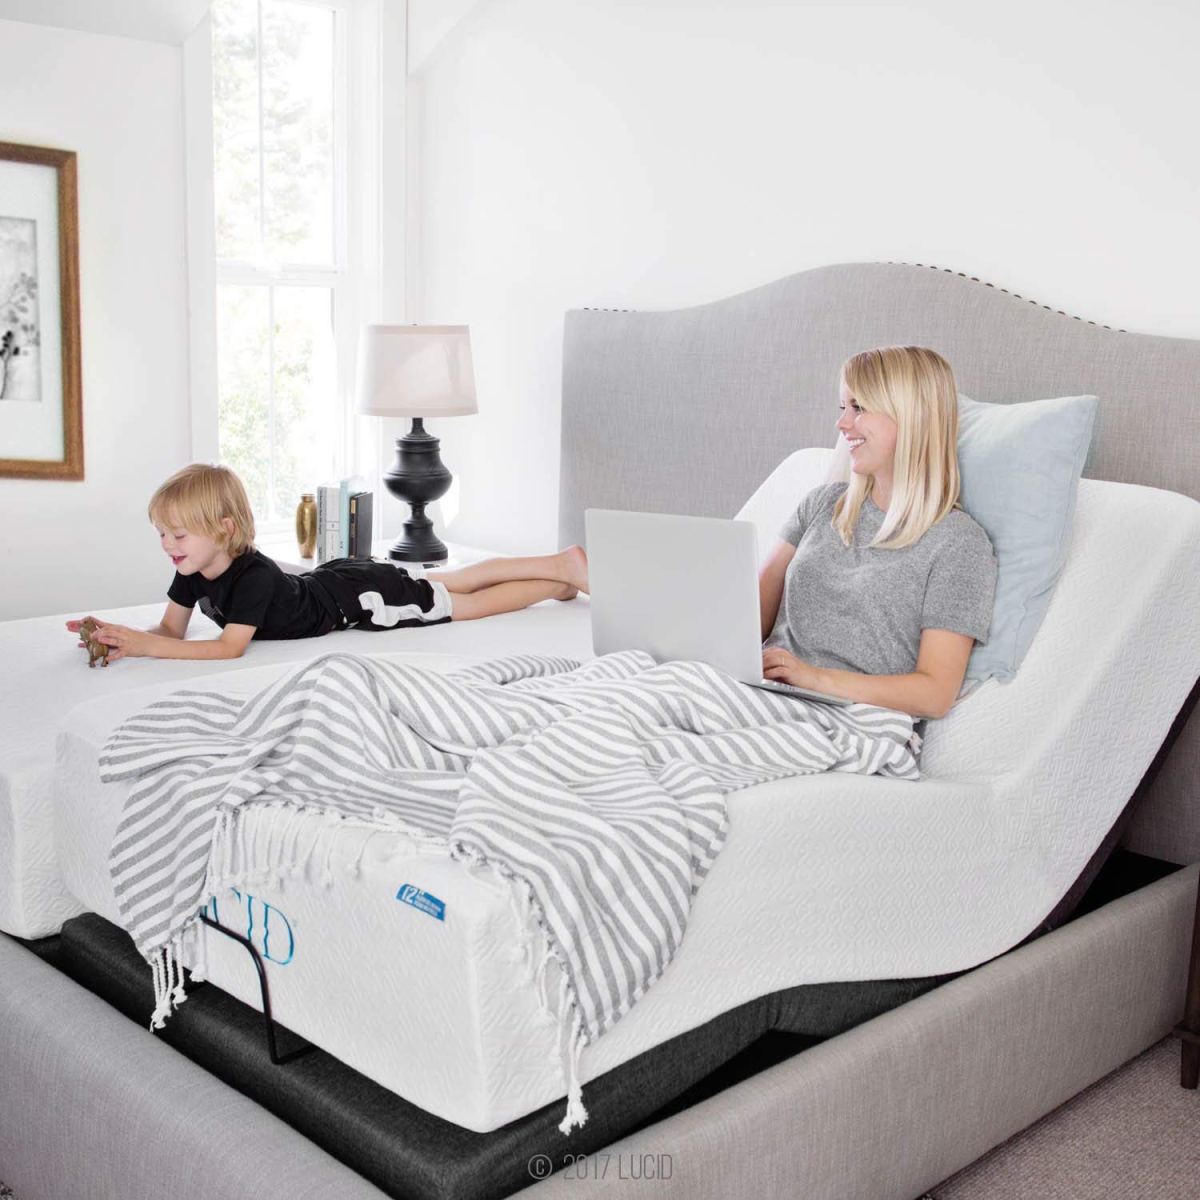 Best Hospital Beds for Home use